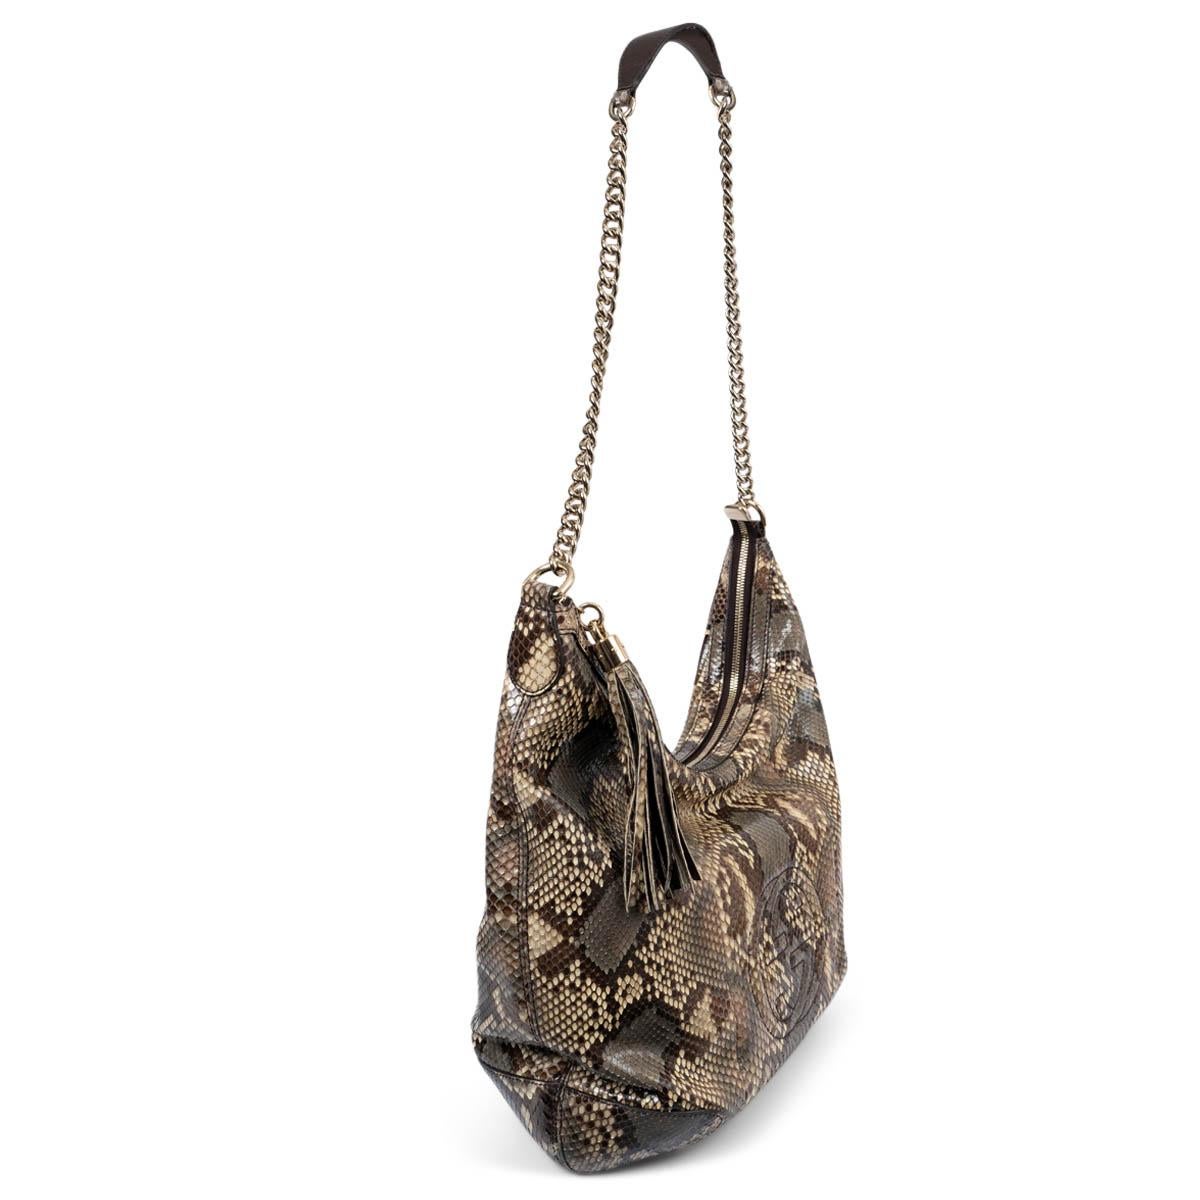 100% authentic Gucci Soho shoulder bag in beige, brown and taupe python. Features a GG patch on the front. Closes with a zipper with tassel pull on top. Lined in beige canvas with two open pockets against the front and a zipper pocket against the